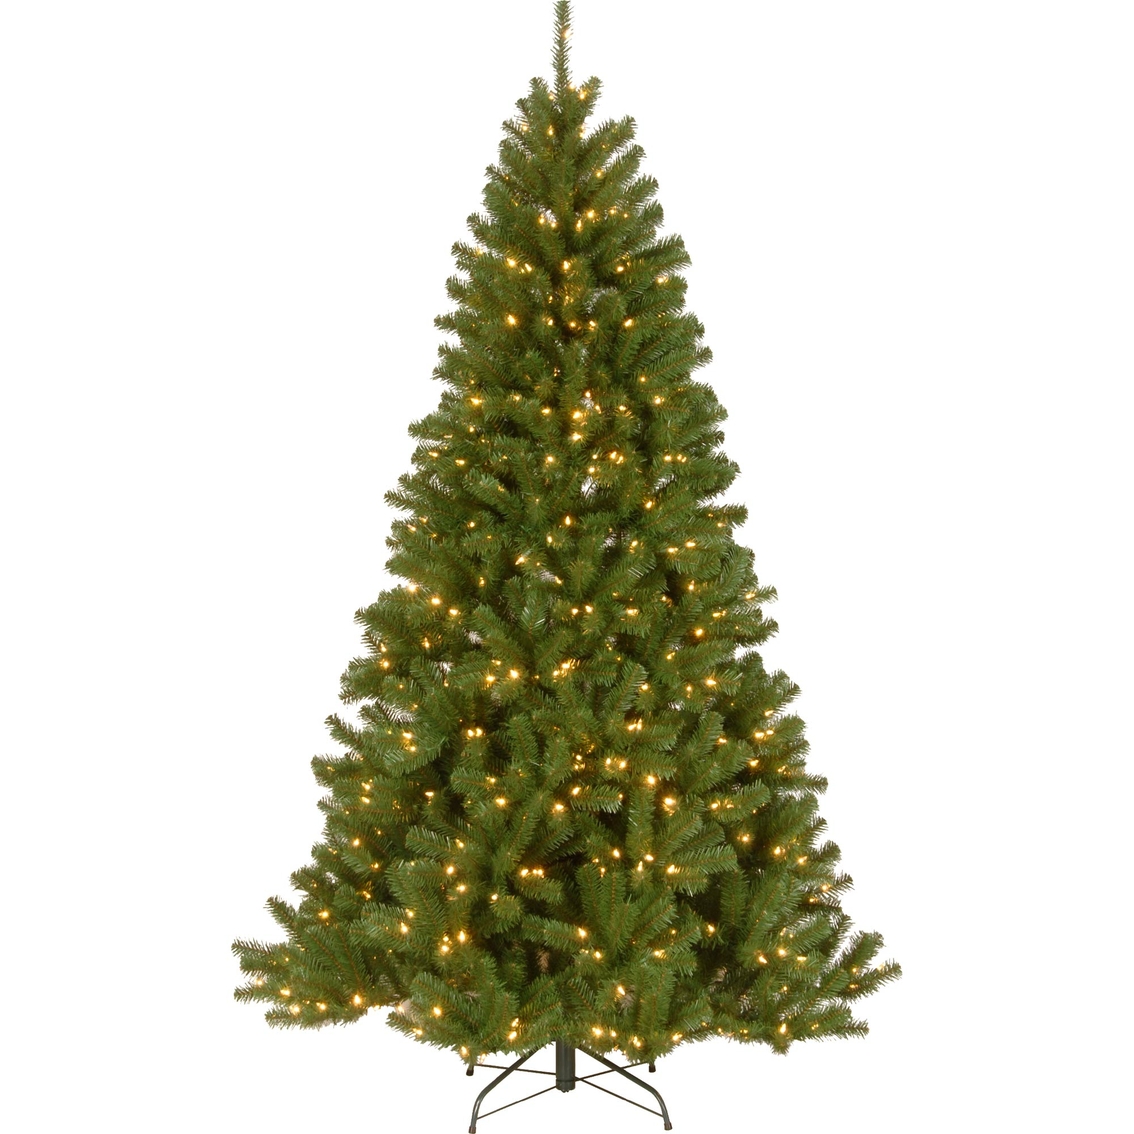 National Tree Company North Valley Spruce Tree with Clear Lights - Image 2 of 2